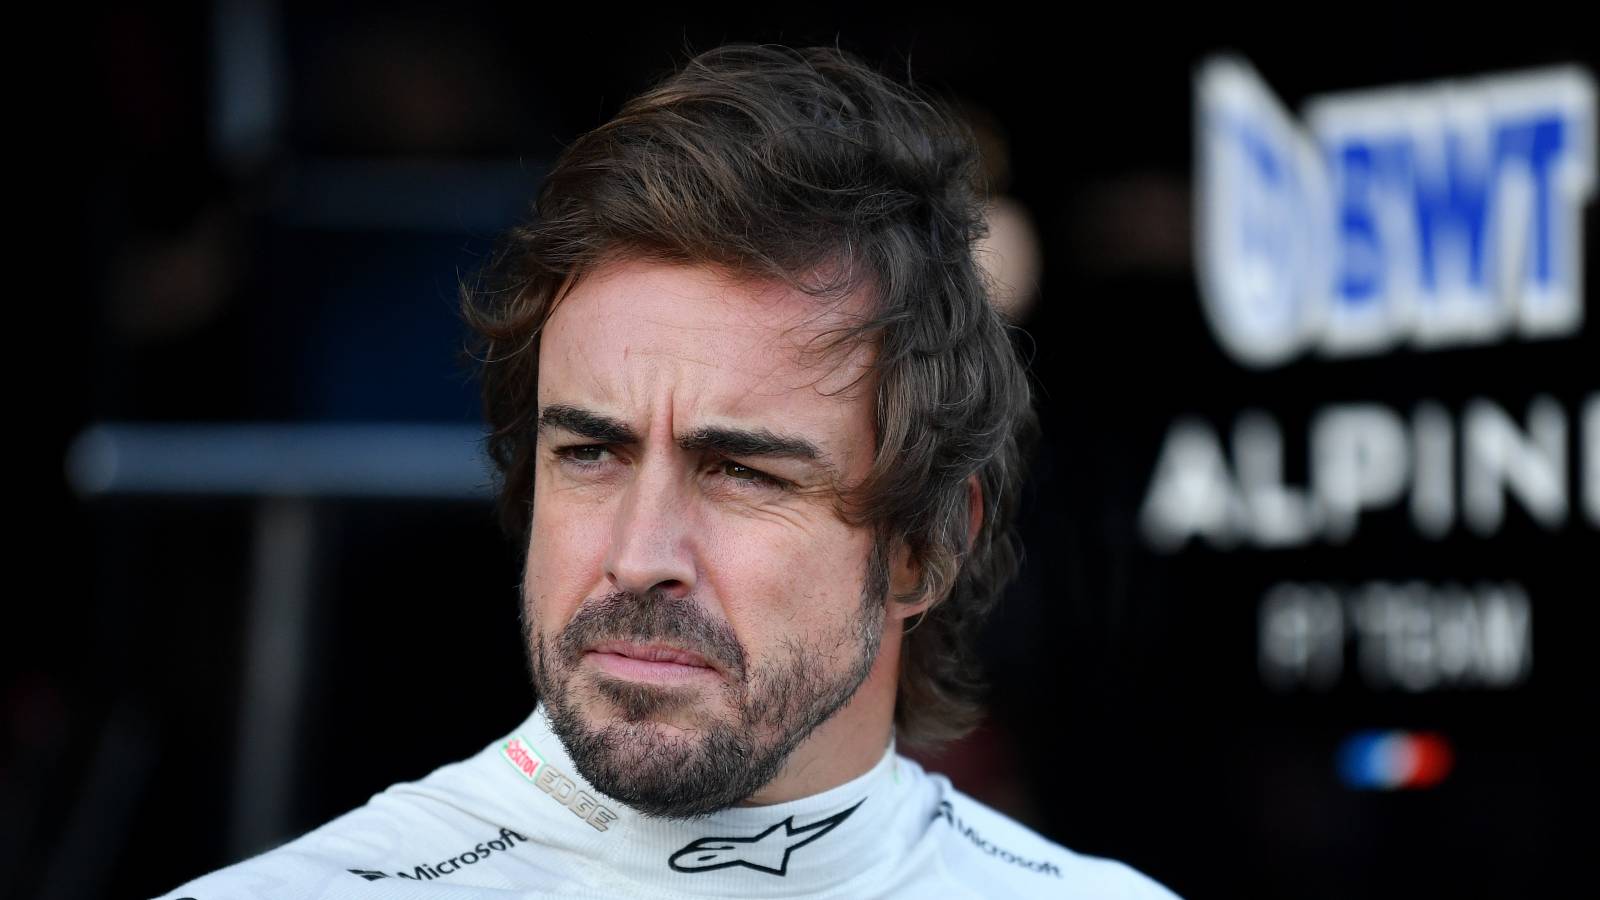 Fernando Alonso on the eve of the Australian GP weekend. Melbourne April 2022.